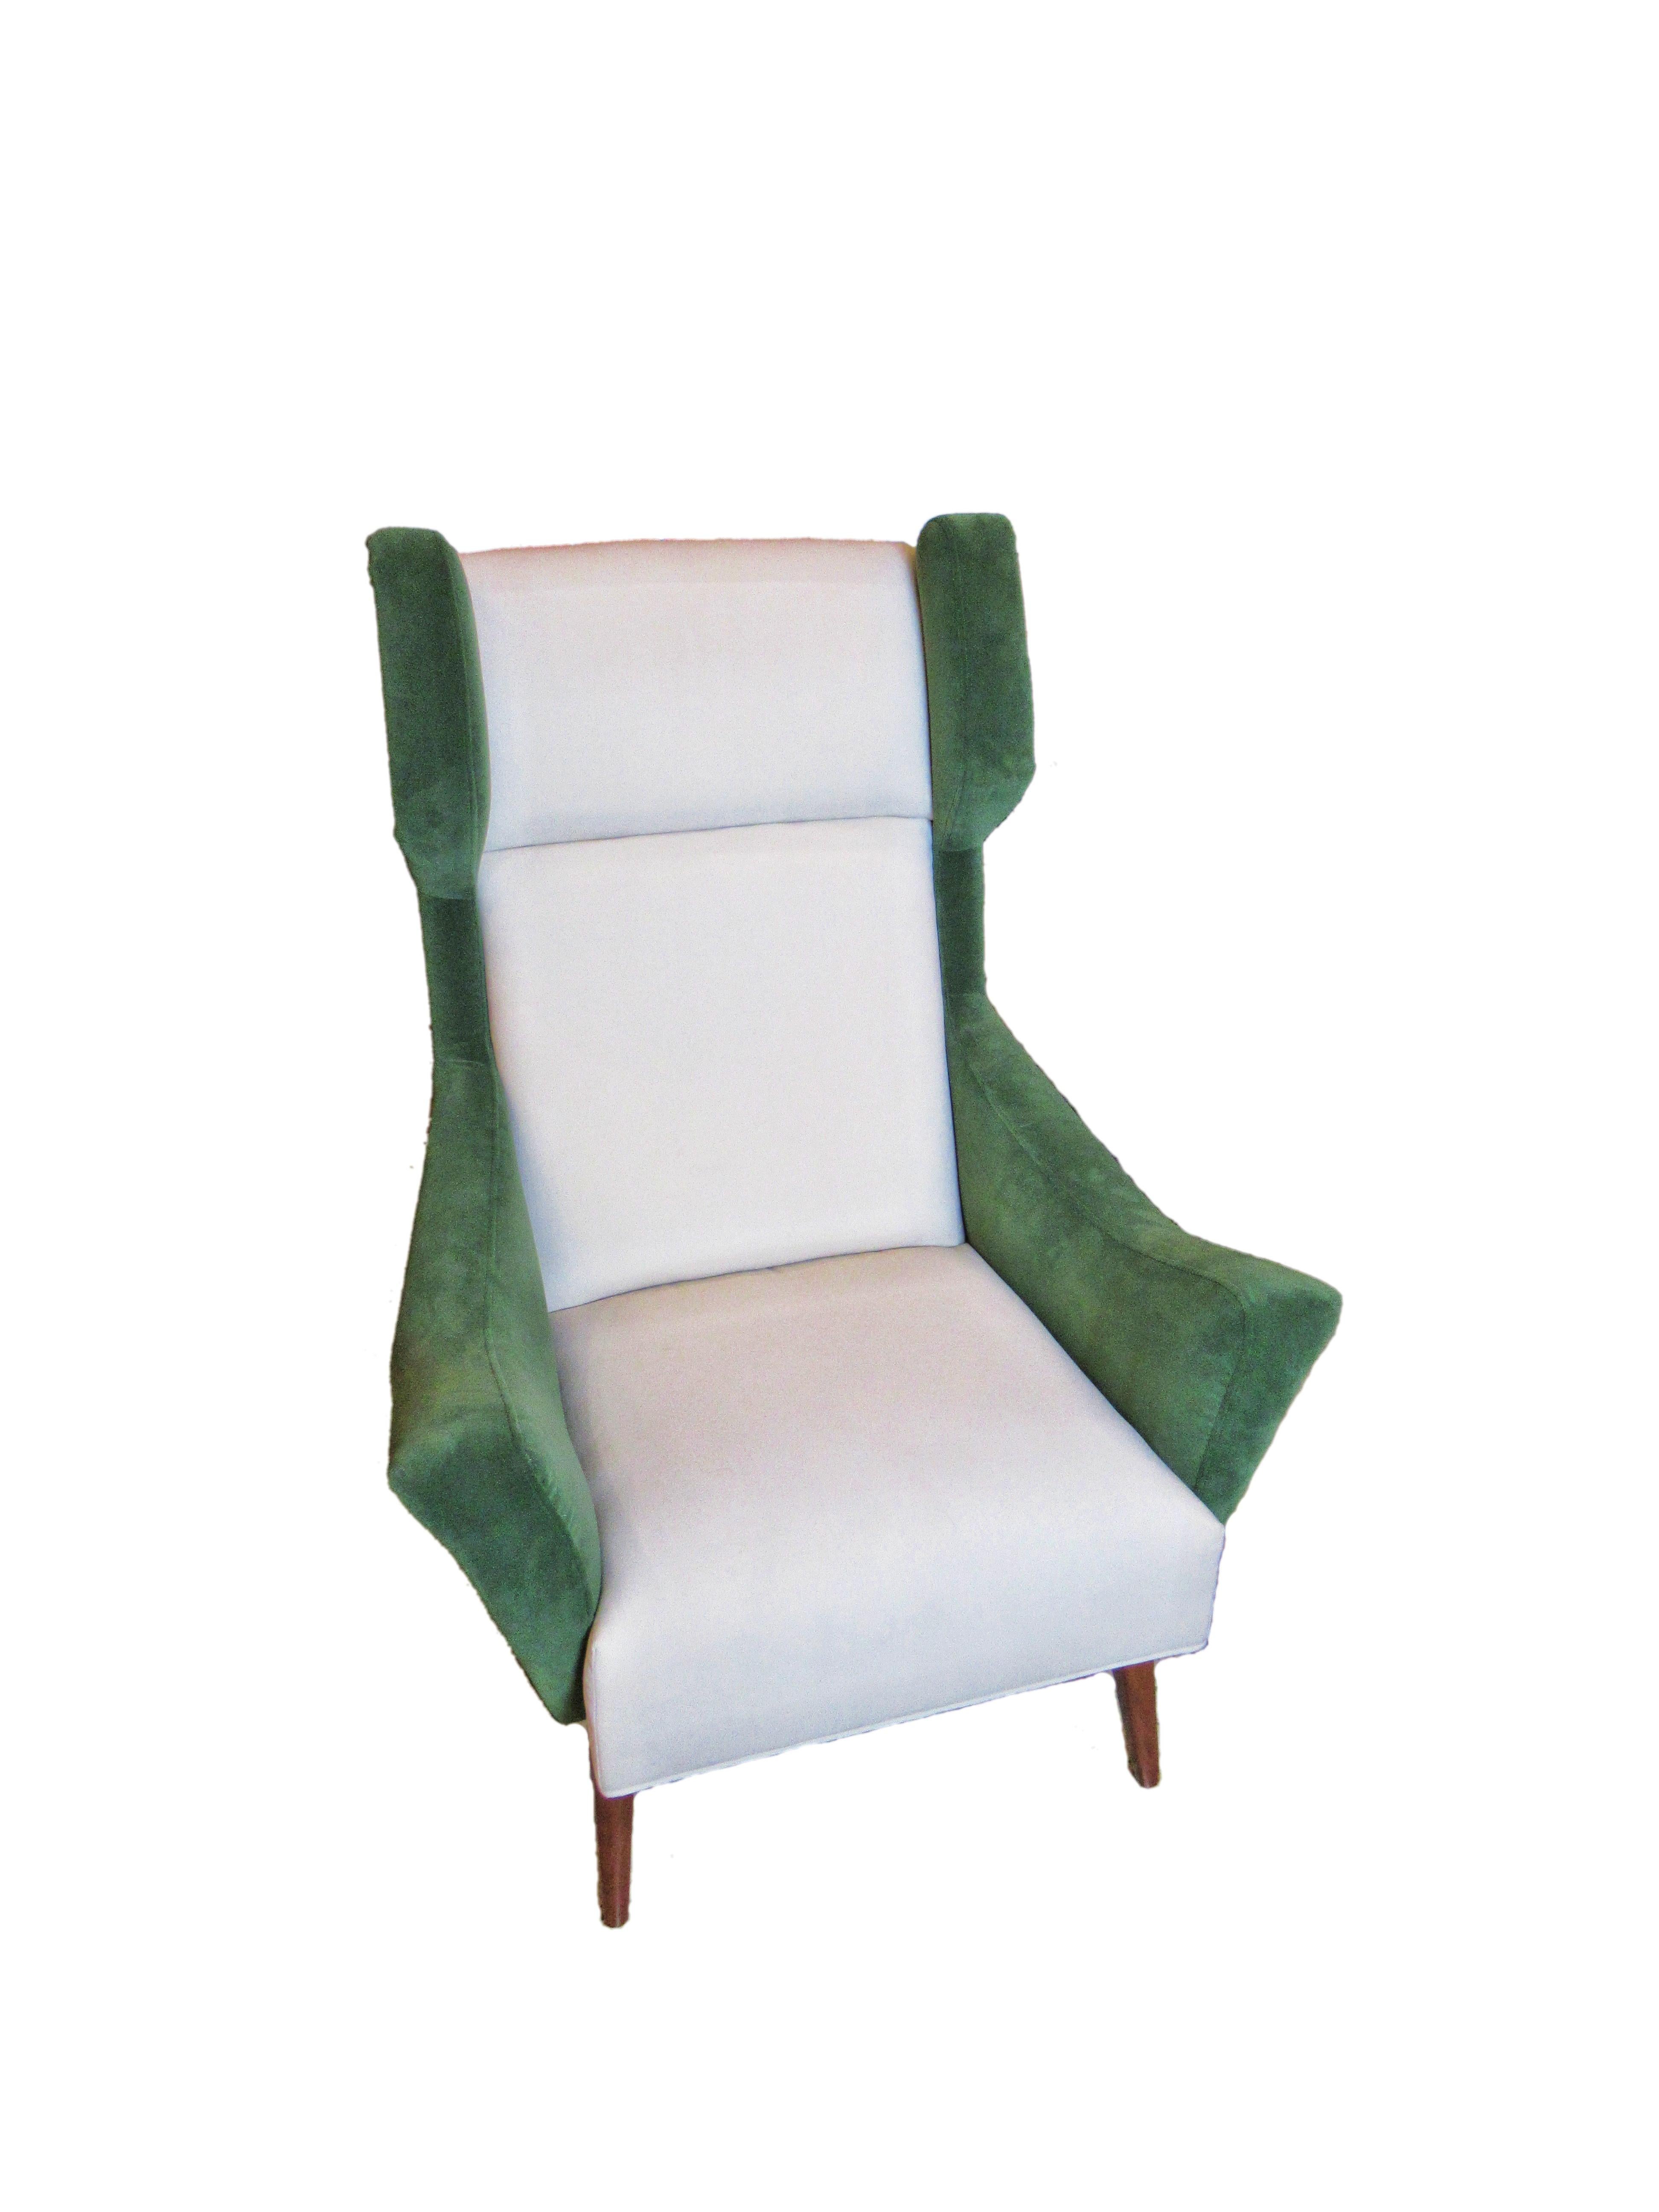 Upholstery Italian Modern Upholstered Wing Chair, Gio Ponti, 1950's For Sale